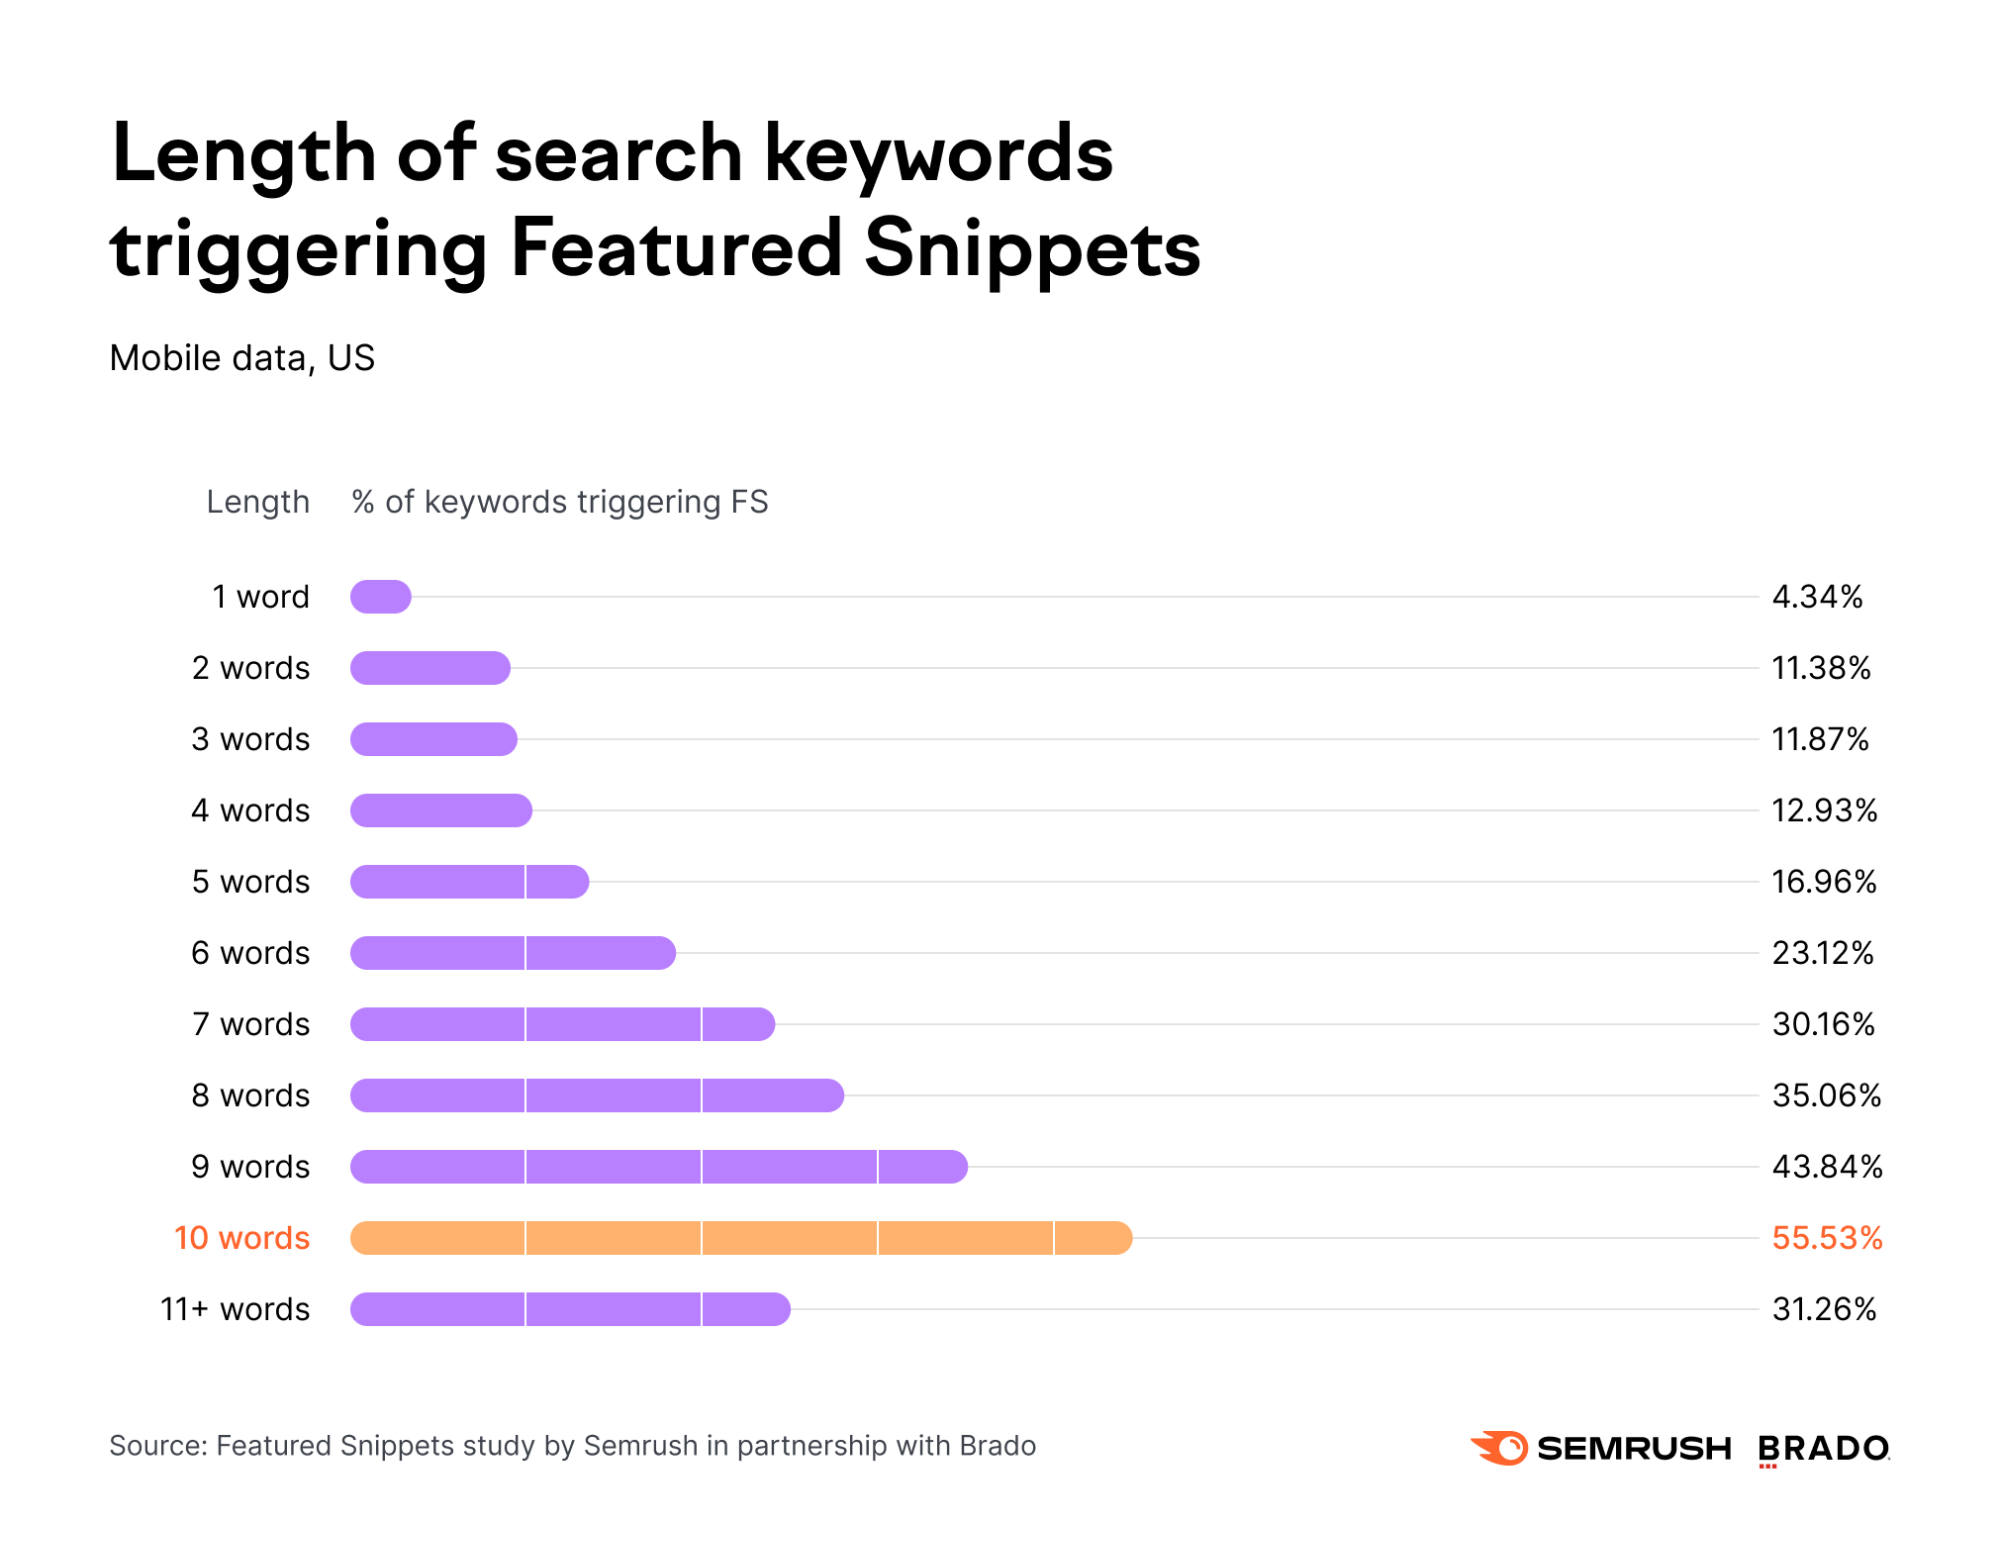 bar graph: length of search keywords triggering featured snippets. 10 words is the highest, at 55%